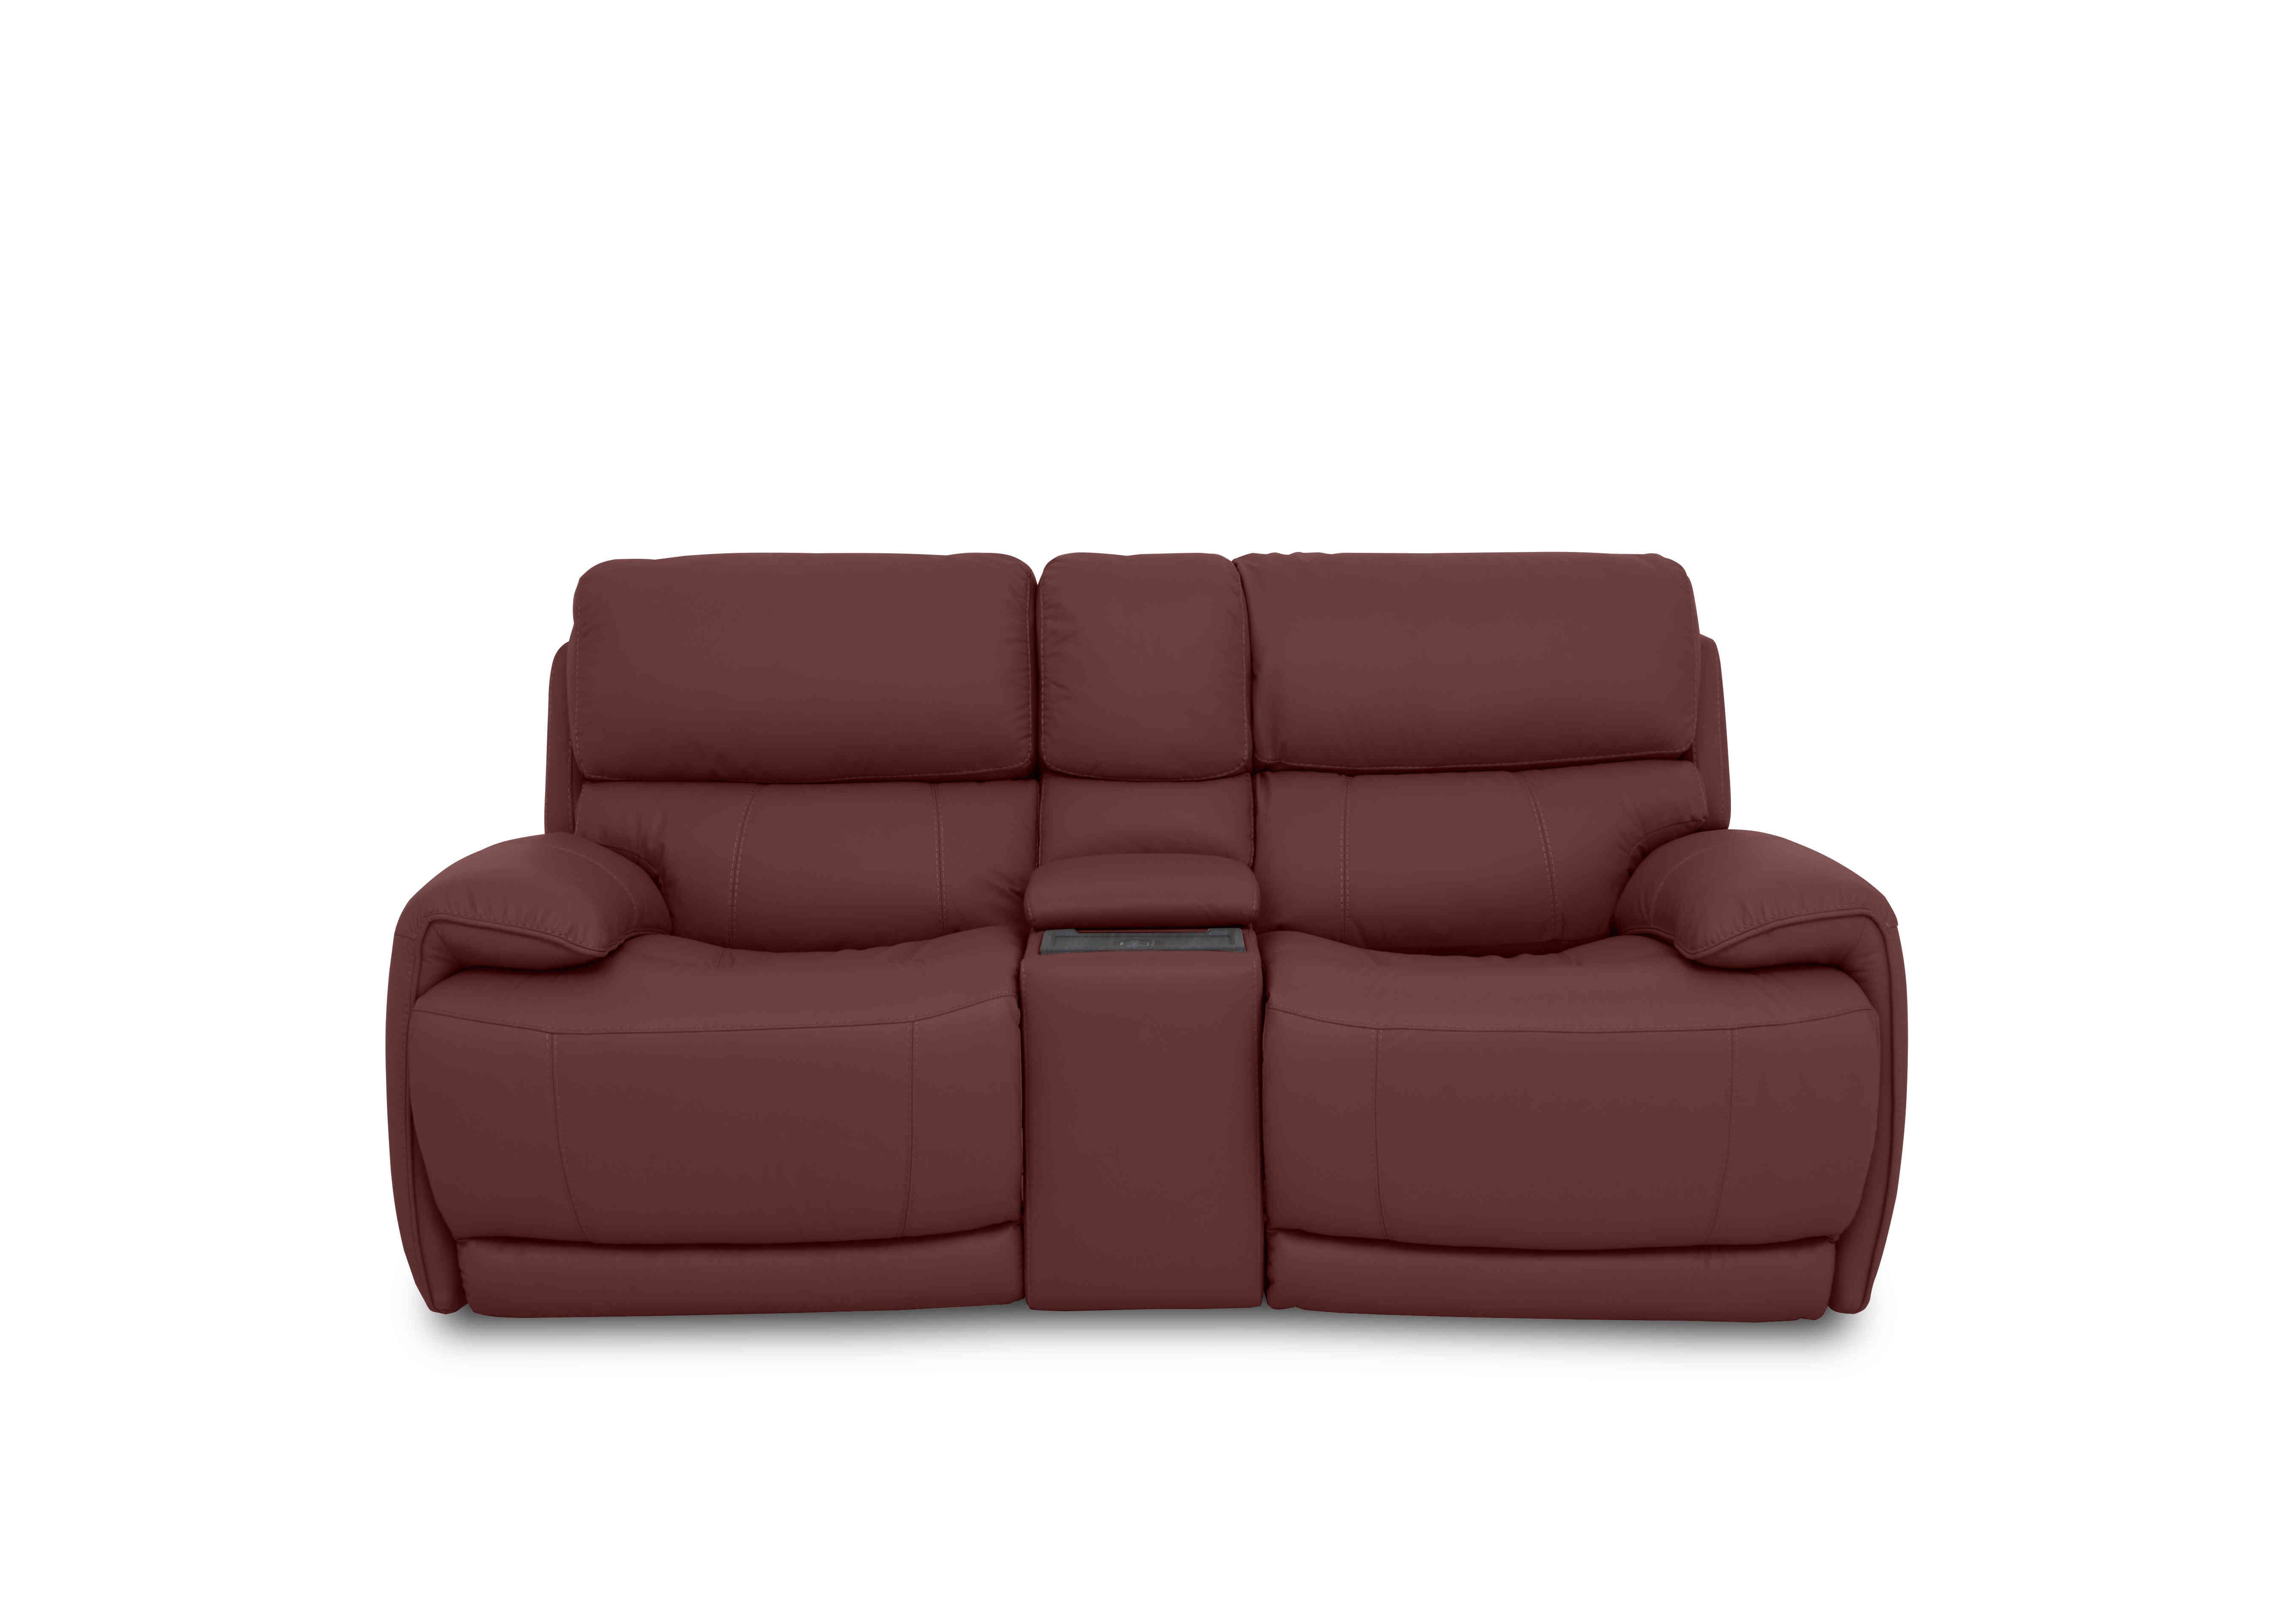 Rocco 2 Seater Leather Power Rocker Sofa with Cup Holders and Power Headrests in Bv-035c Deep Red on Furniture Village